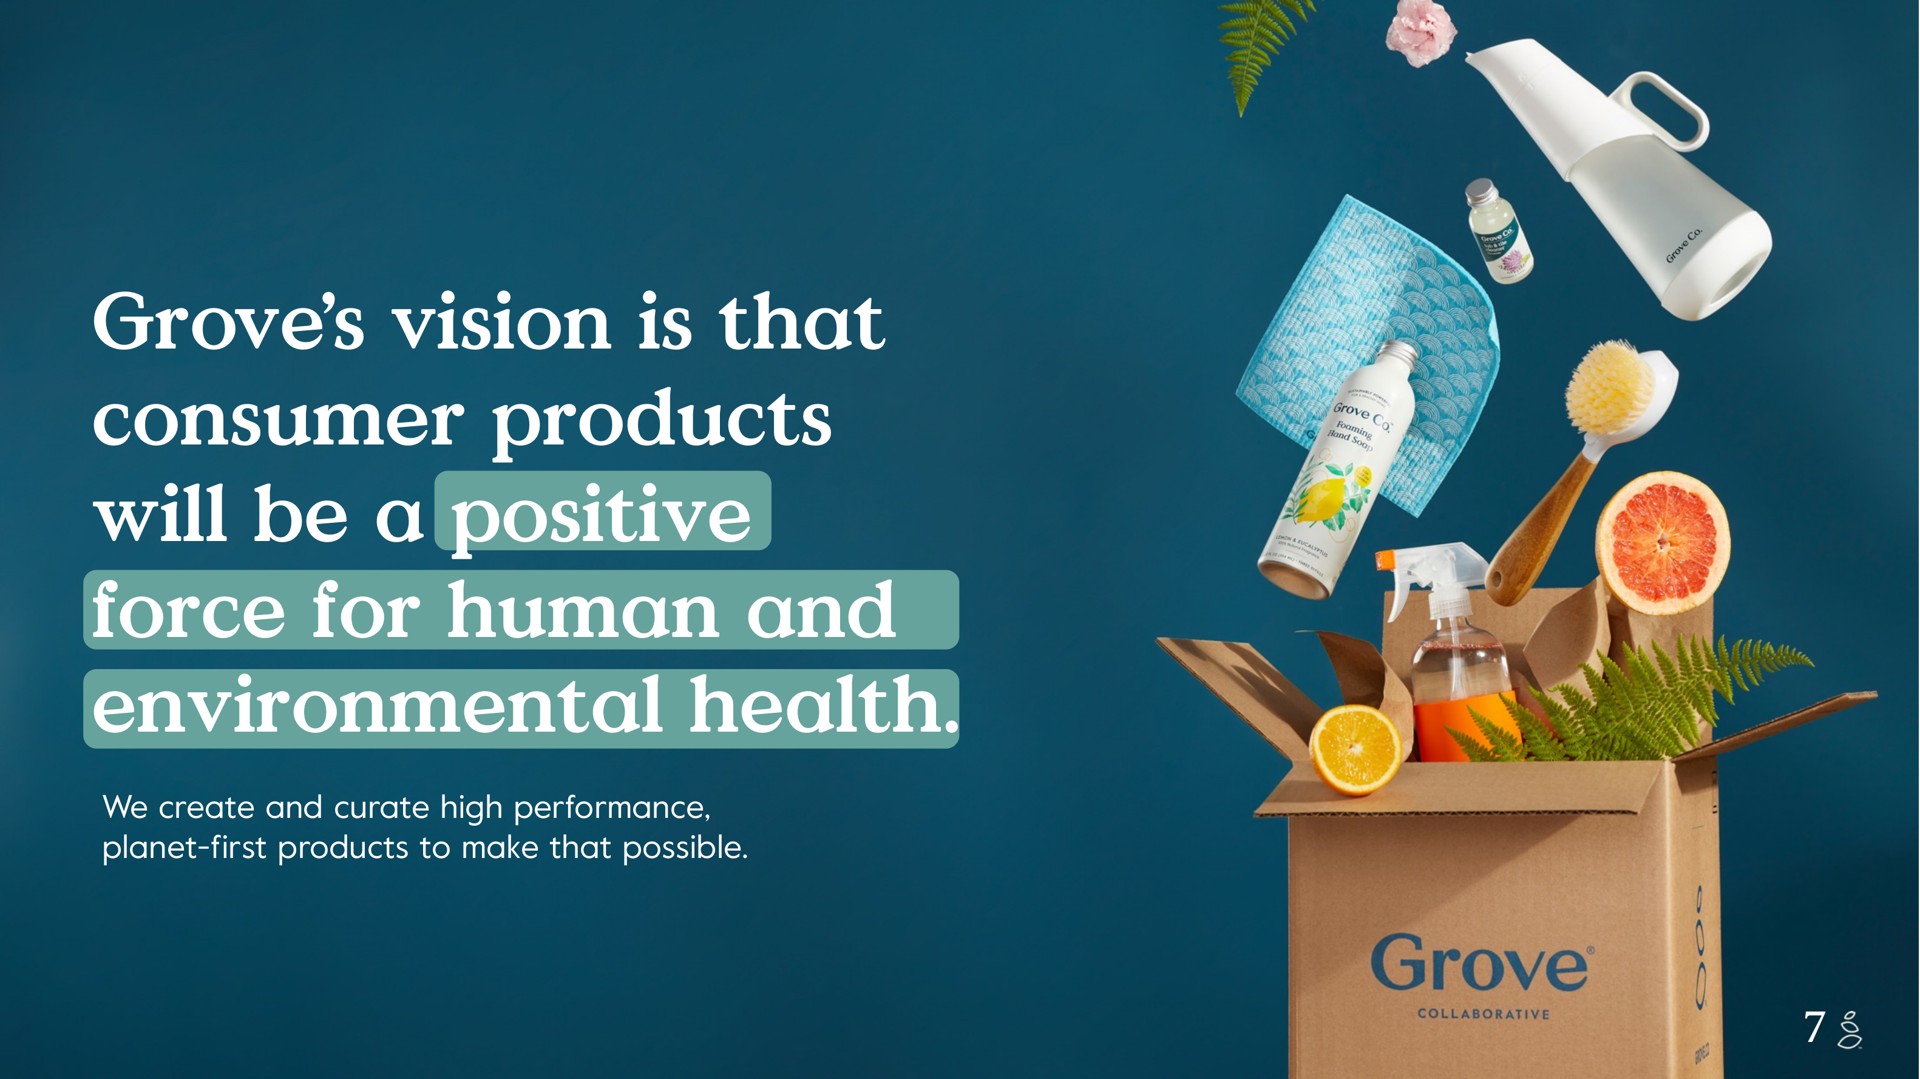 grove vision is that consumer products will be a positive force for human and environmental health we create curate high performance planet first to make possible collaborative | Grove